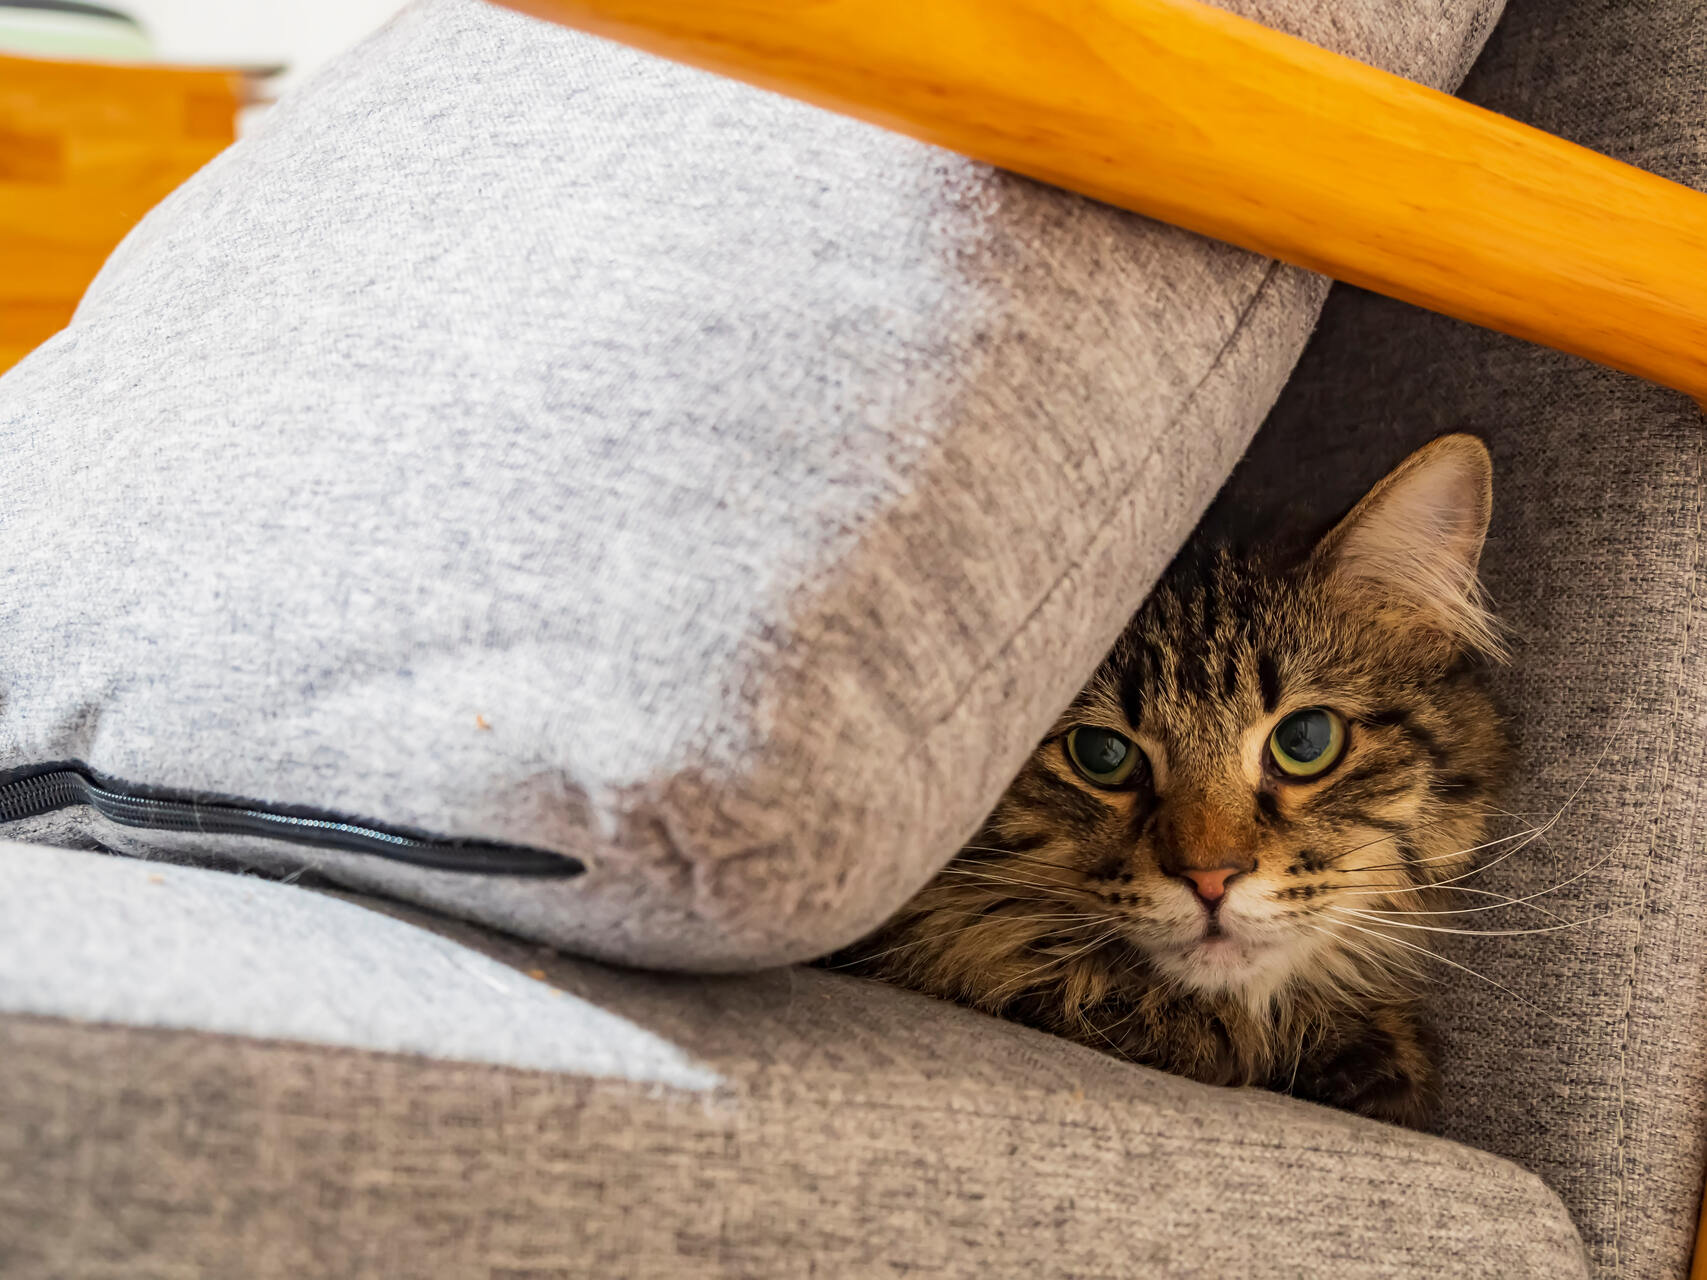 A cat hiding behind a pillow on a couch